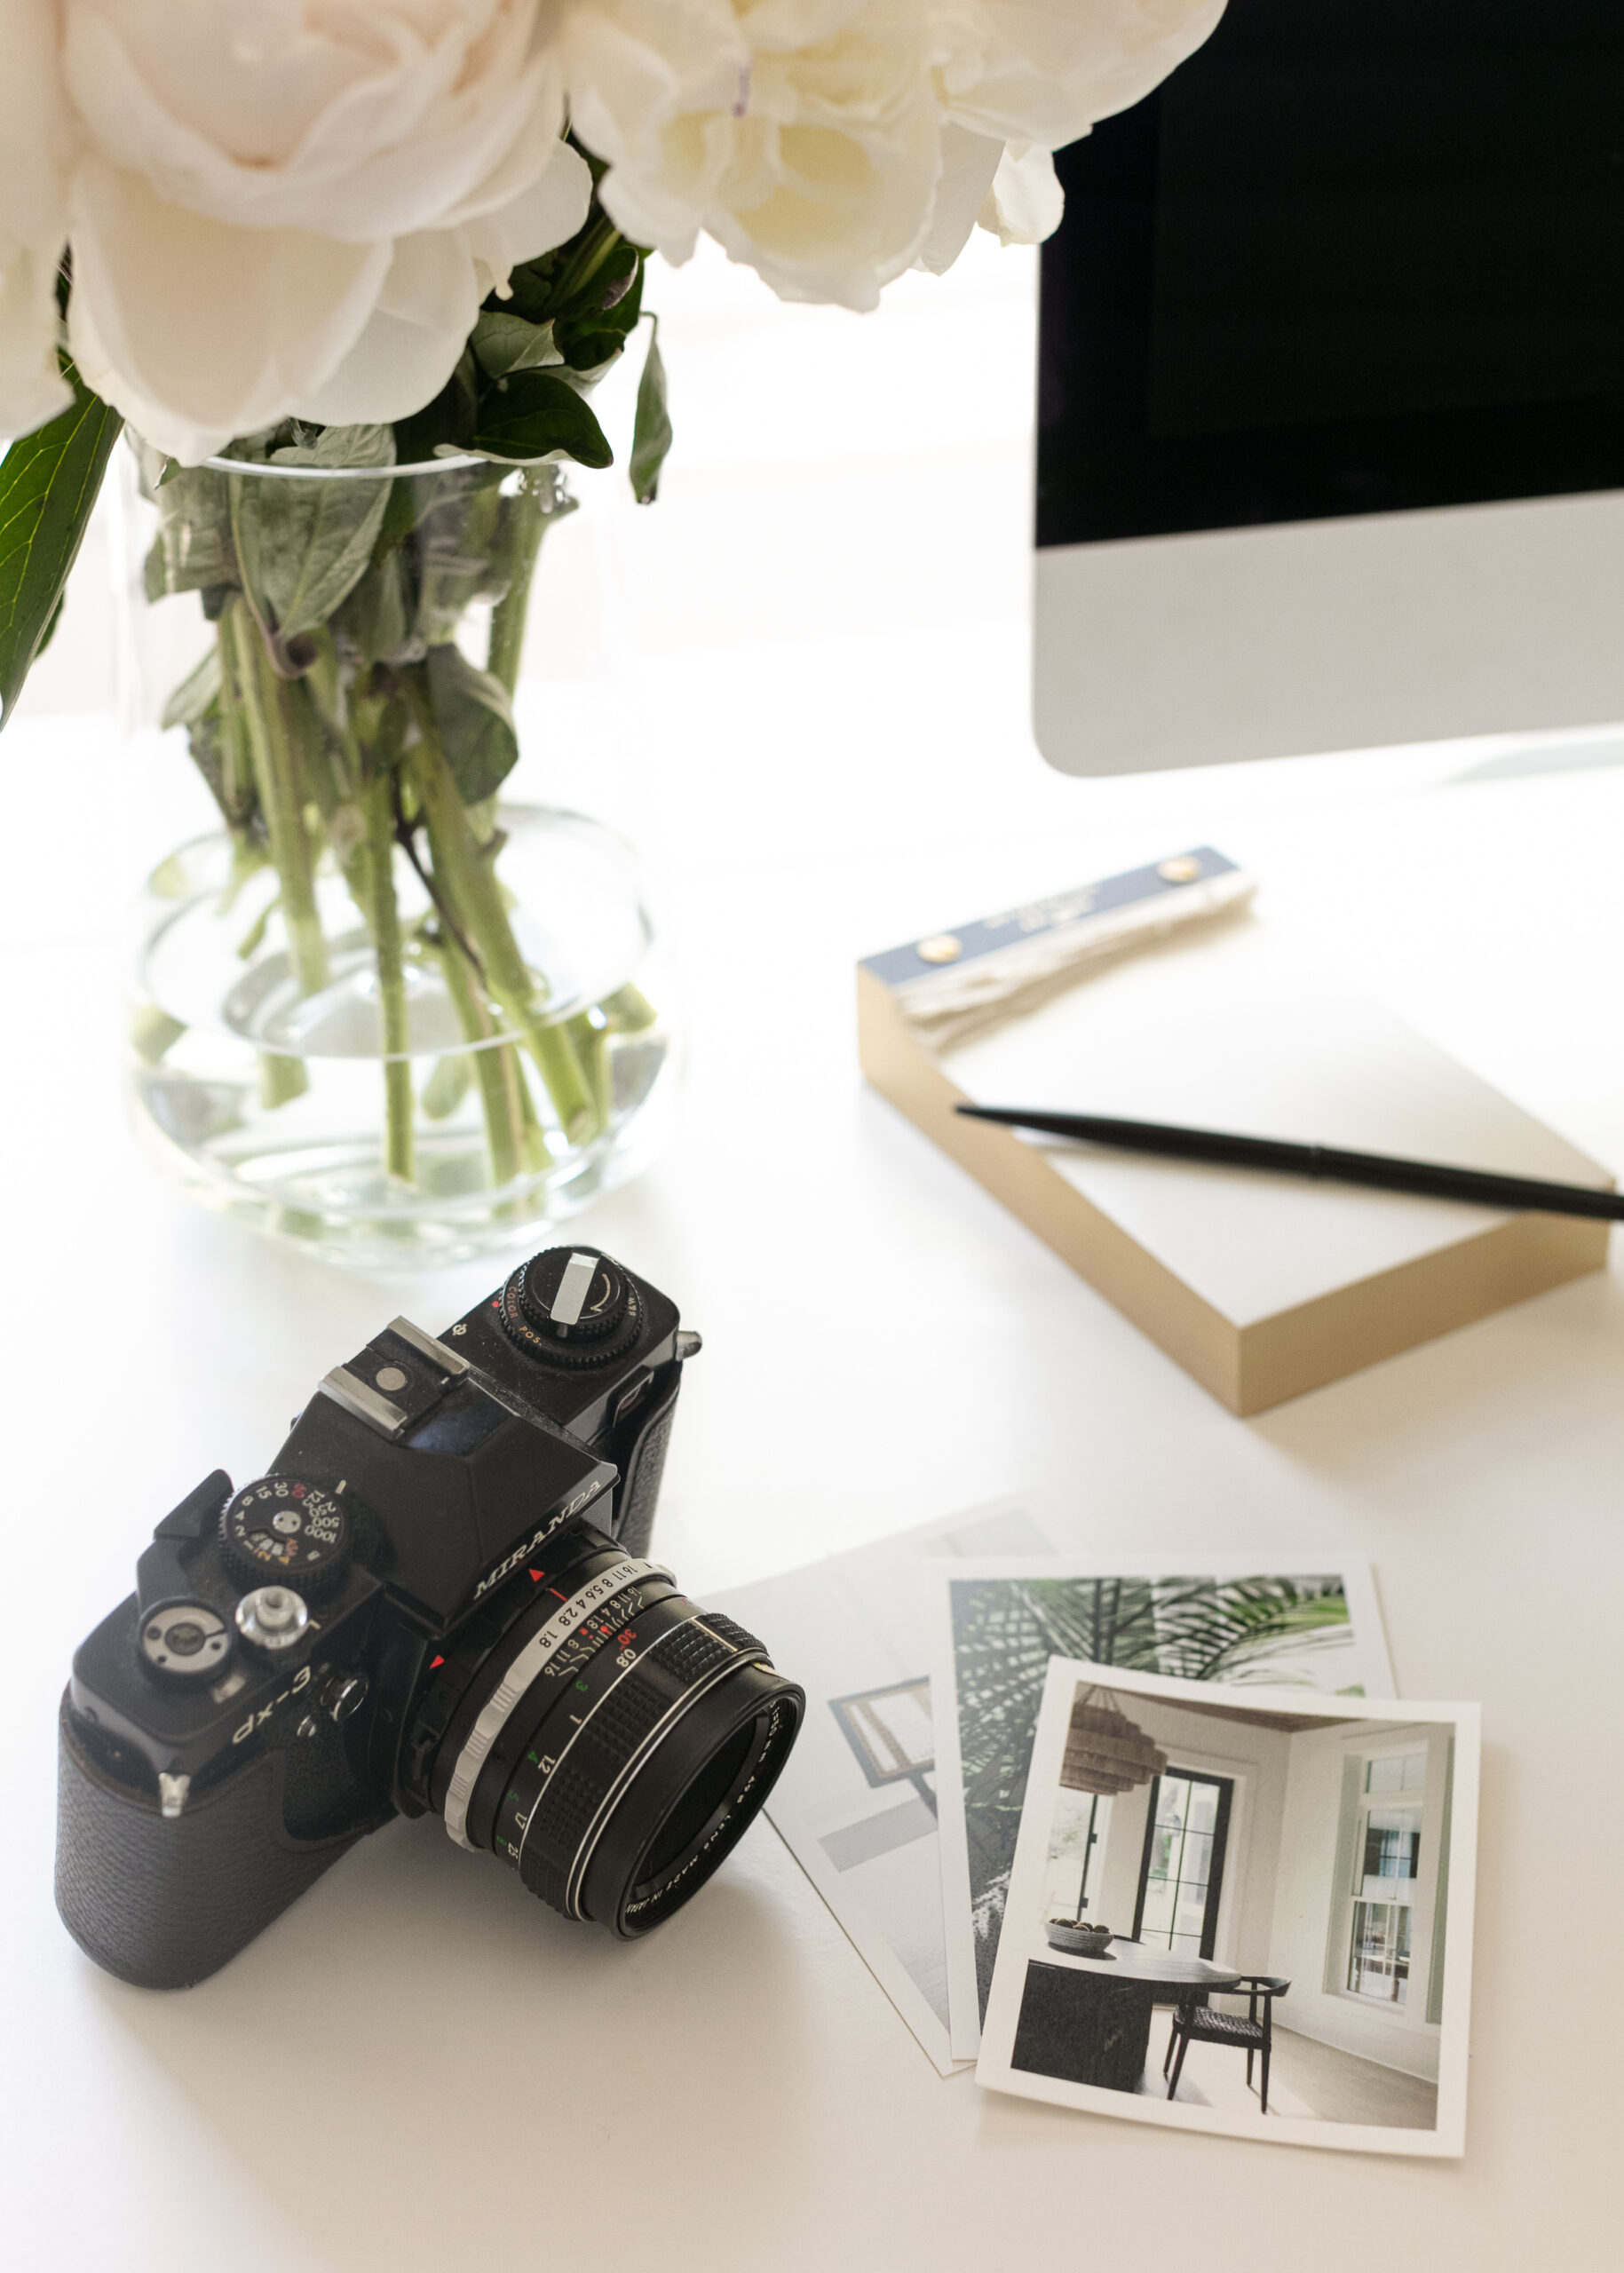 business owner's desktop with a camera, photos, note pad, monitor and vase with flowers